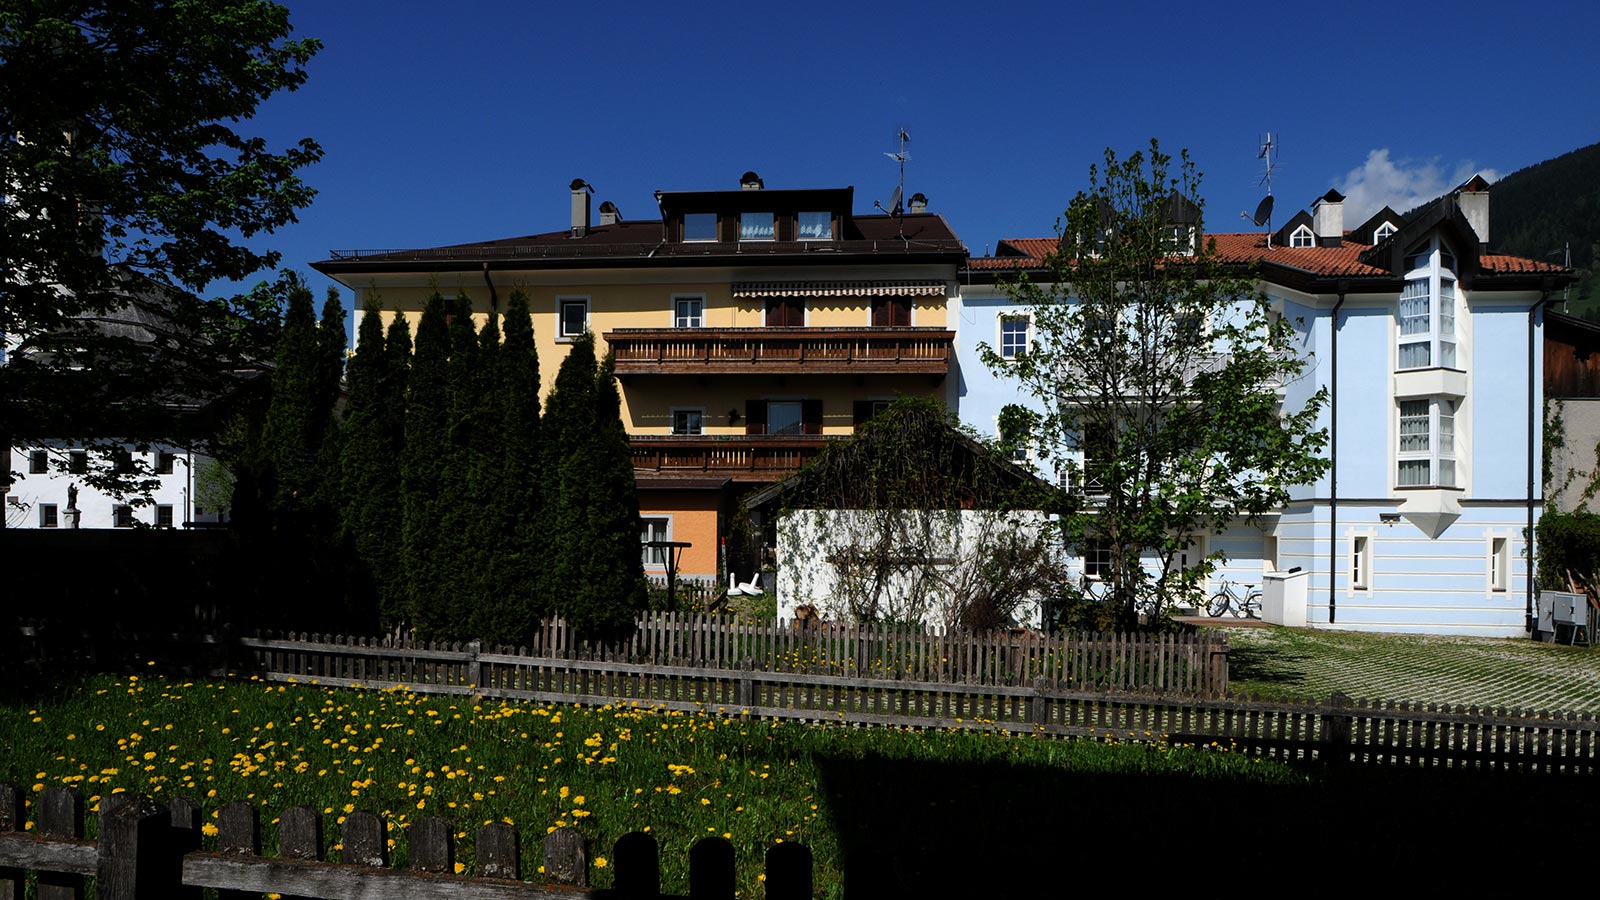 View from the garden of the yellow and blue flats of Villa Christina, with a courtyard fenced by wooden fences below.